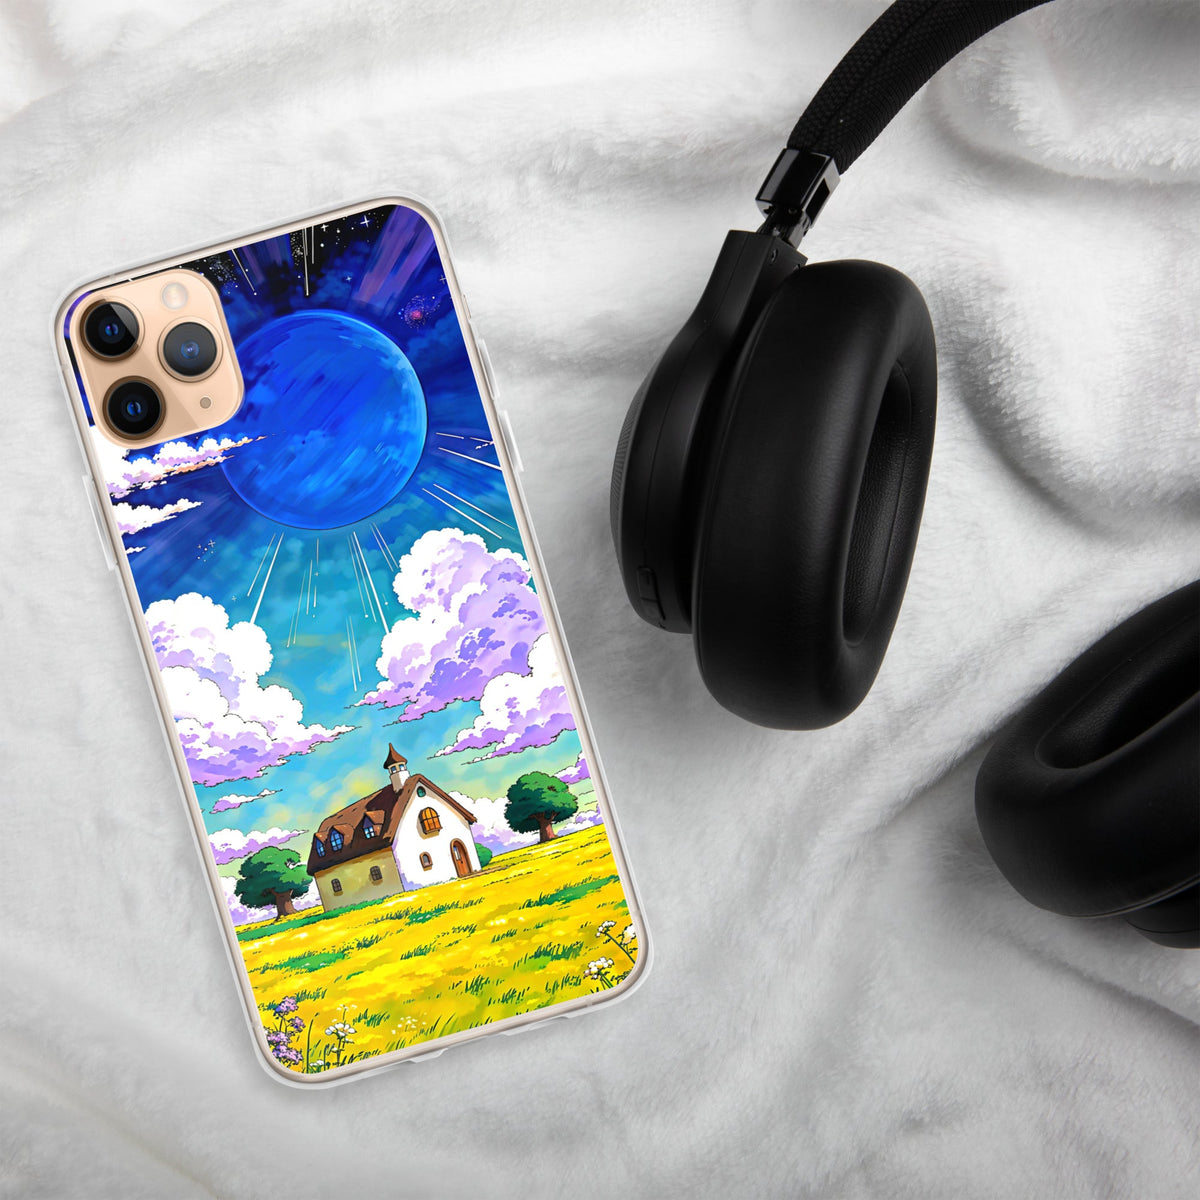 Vibrant Iphone cases - Ever colorful